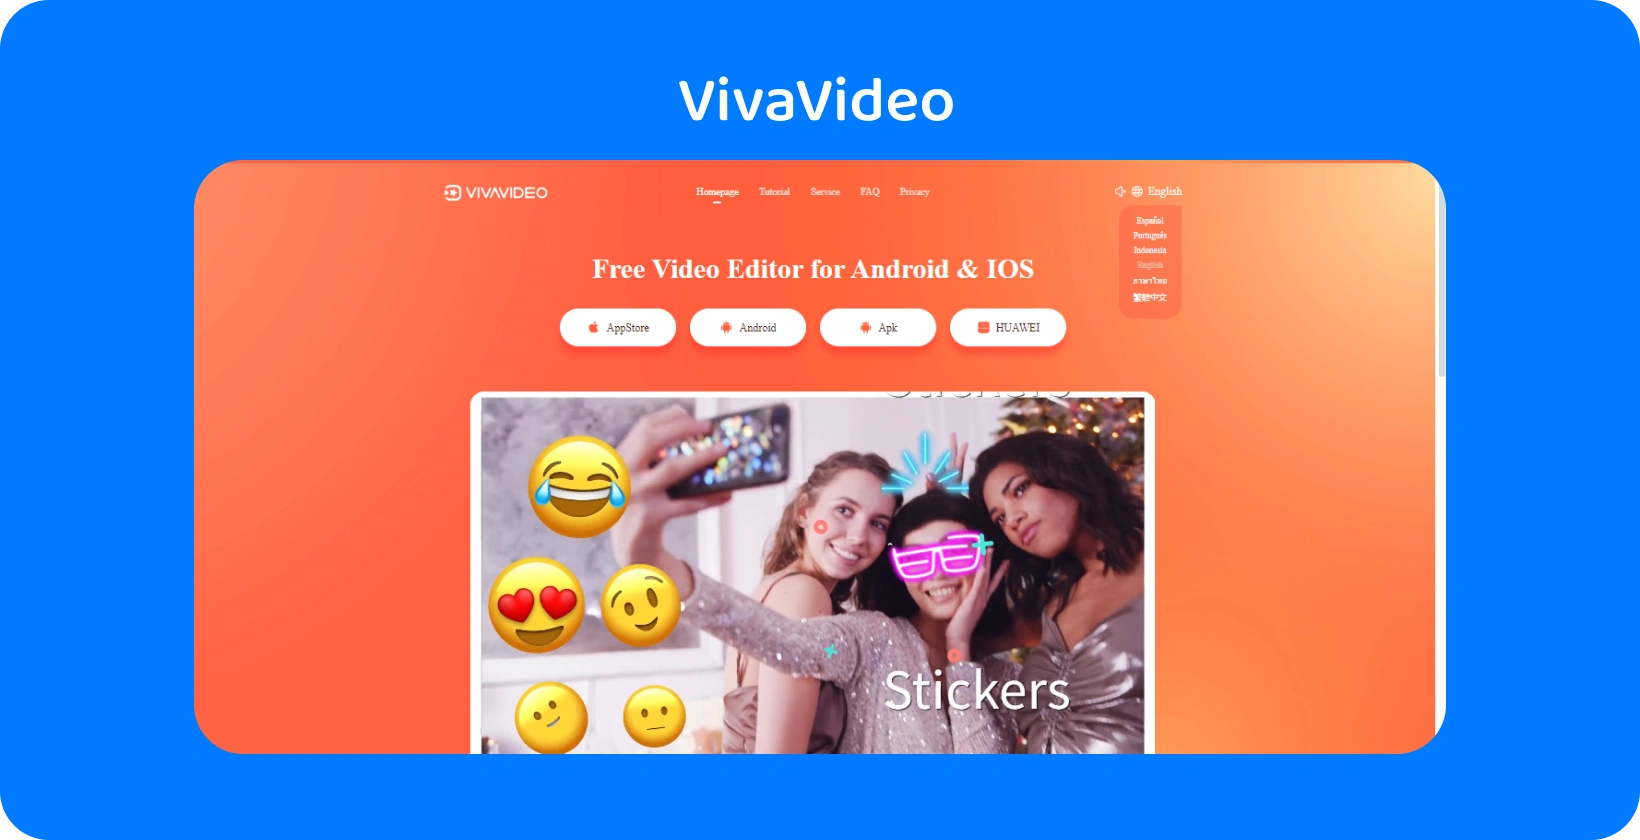 VivaVideo app page with a vibrant orange backdrop, showcasing sticker features for enhancing videos on Android and iOS.
